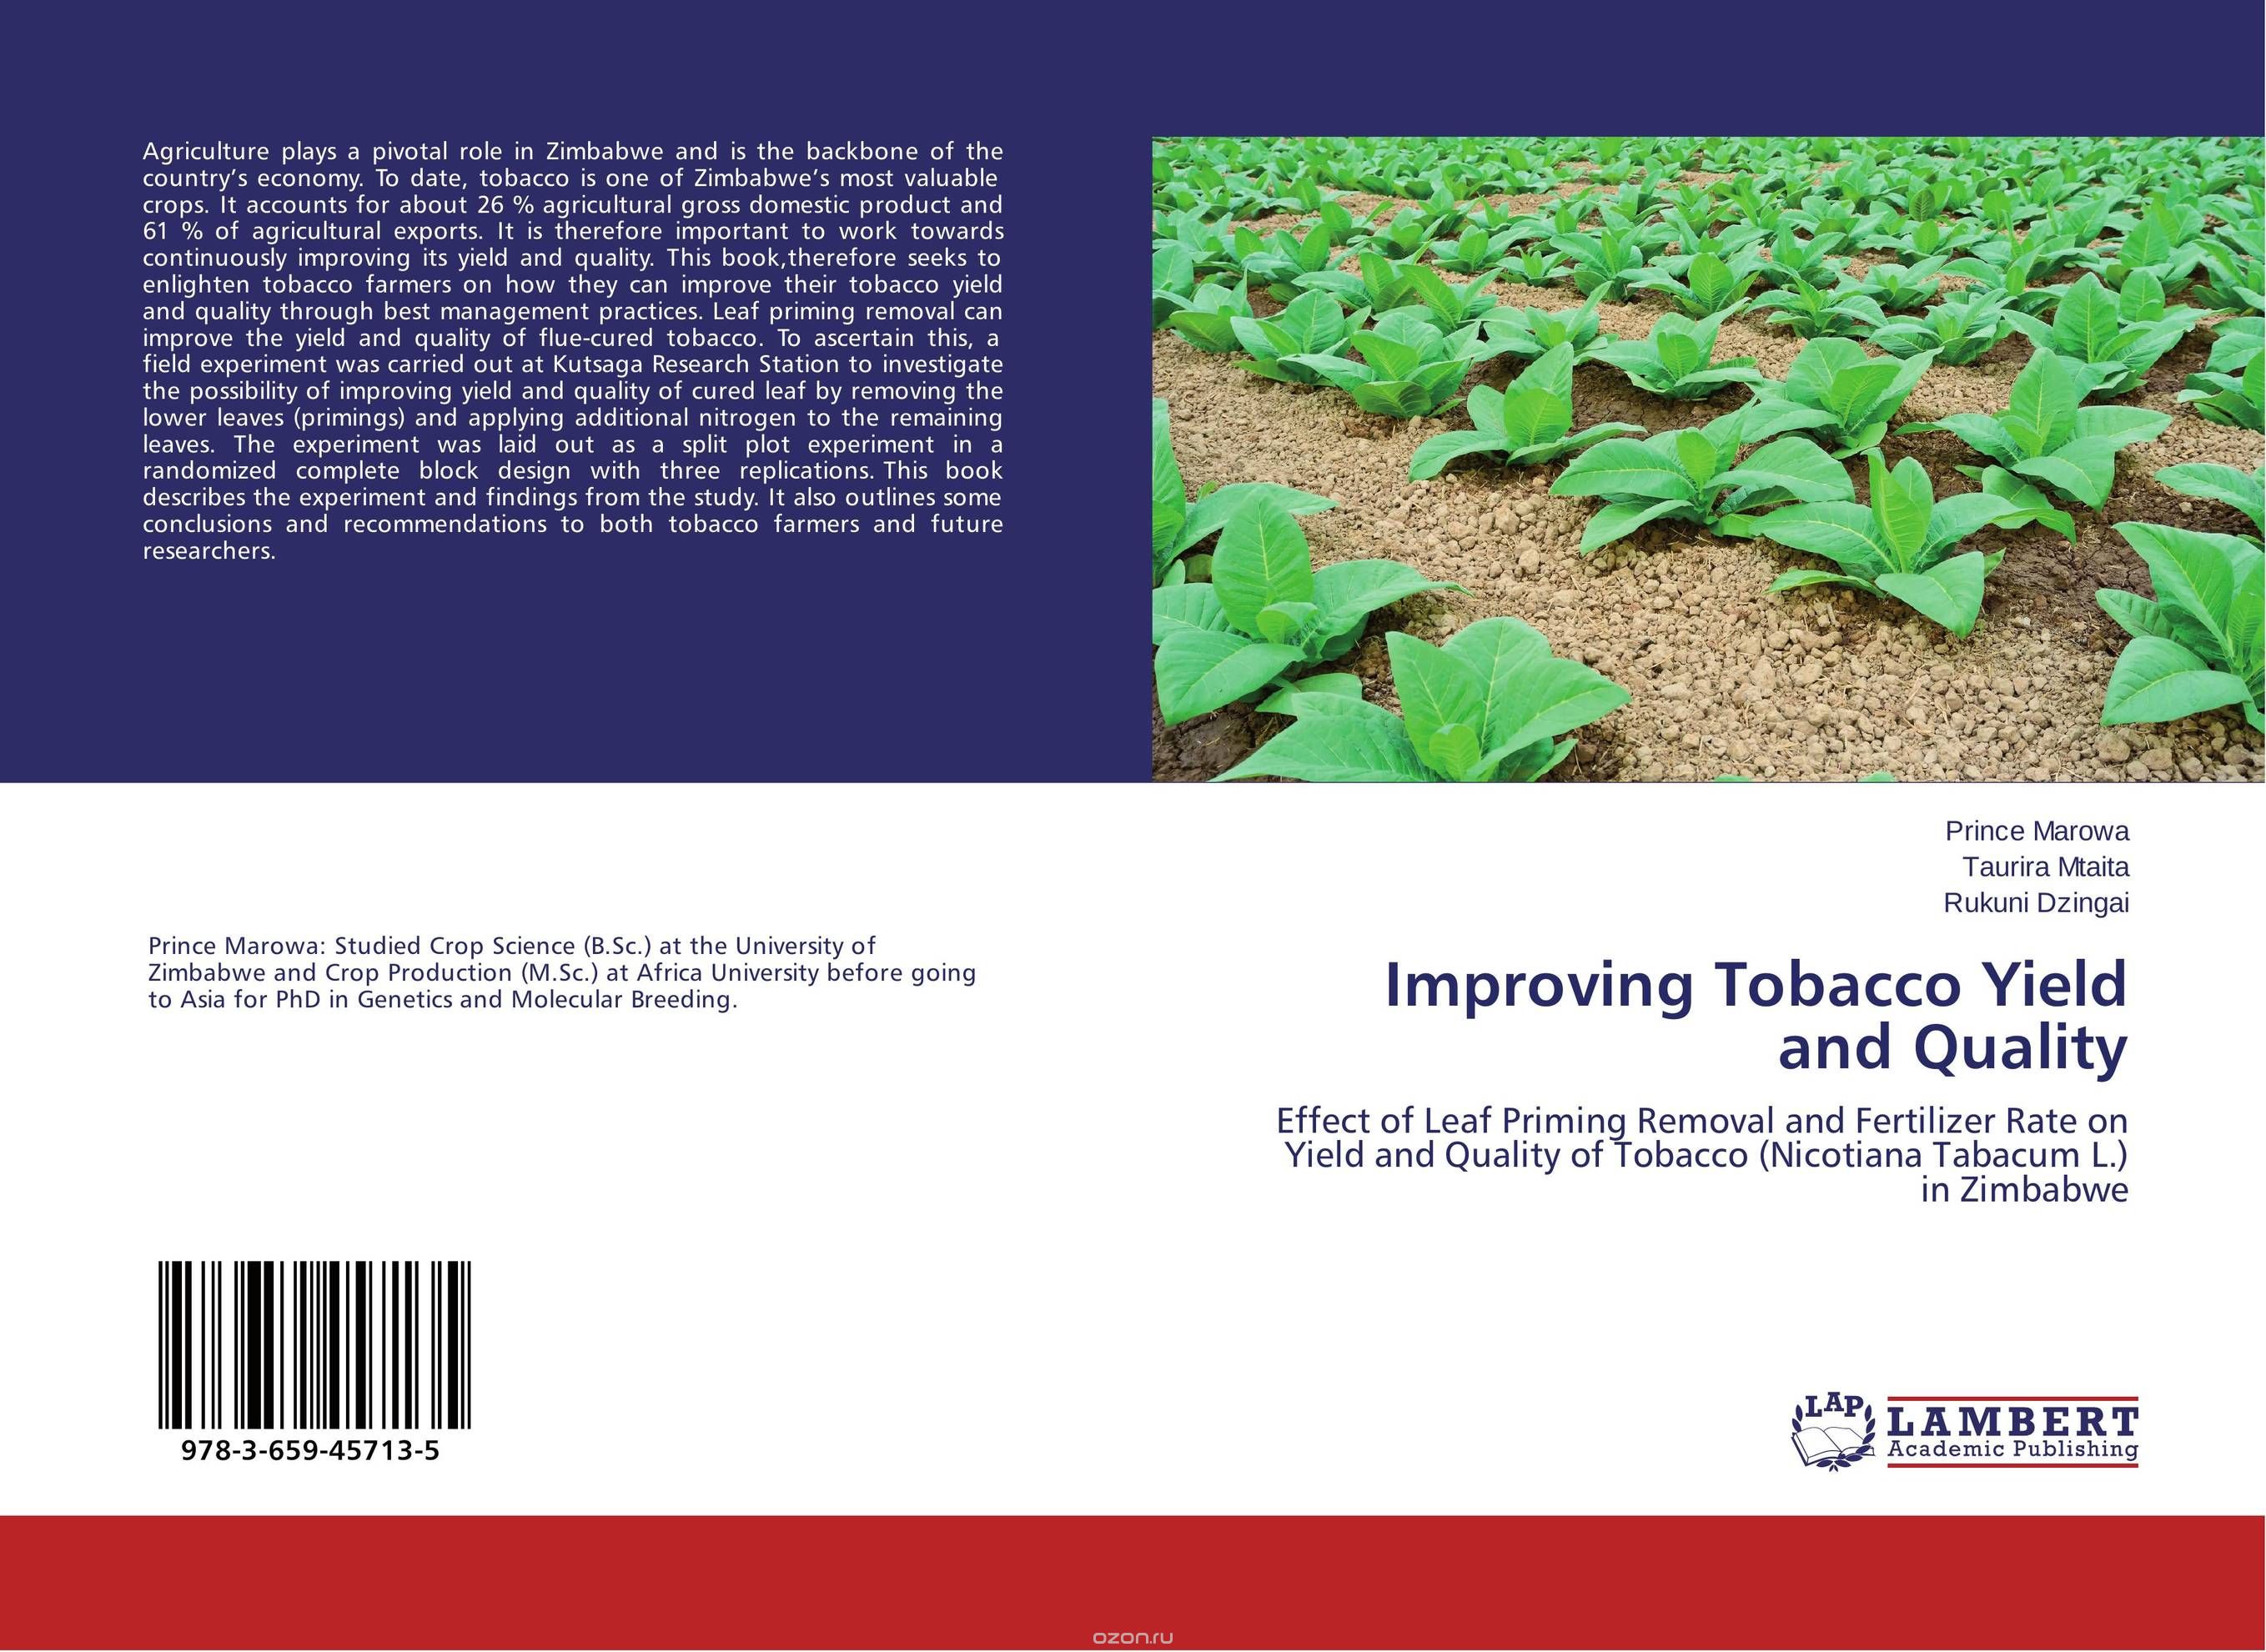 Improving Tobacco Yield and Quality